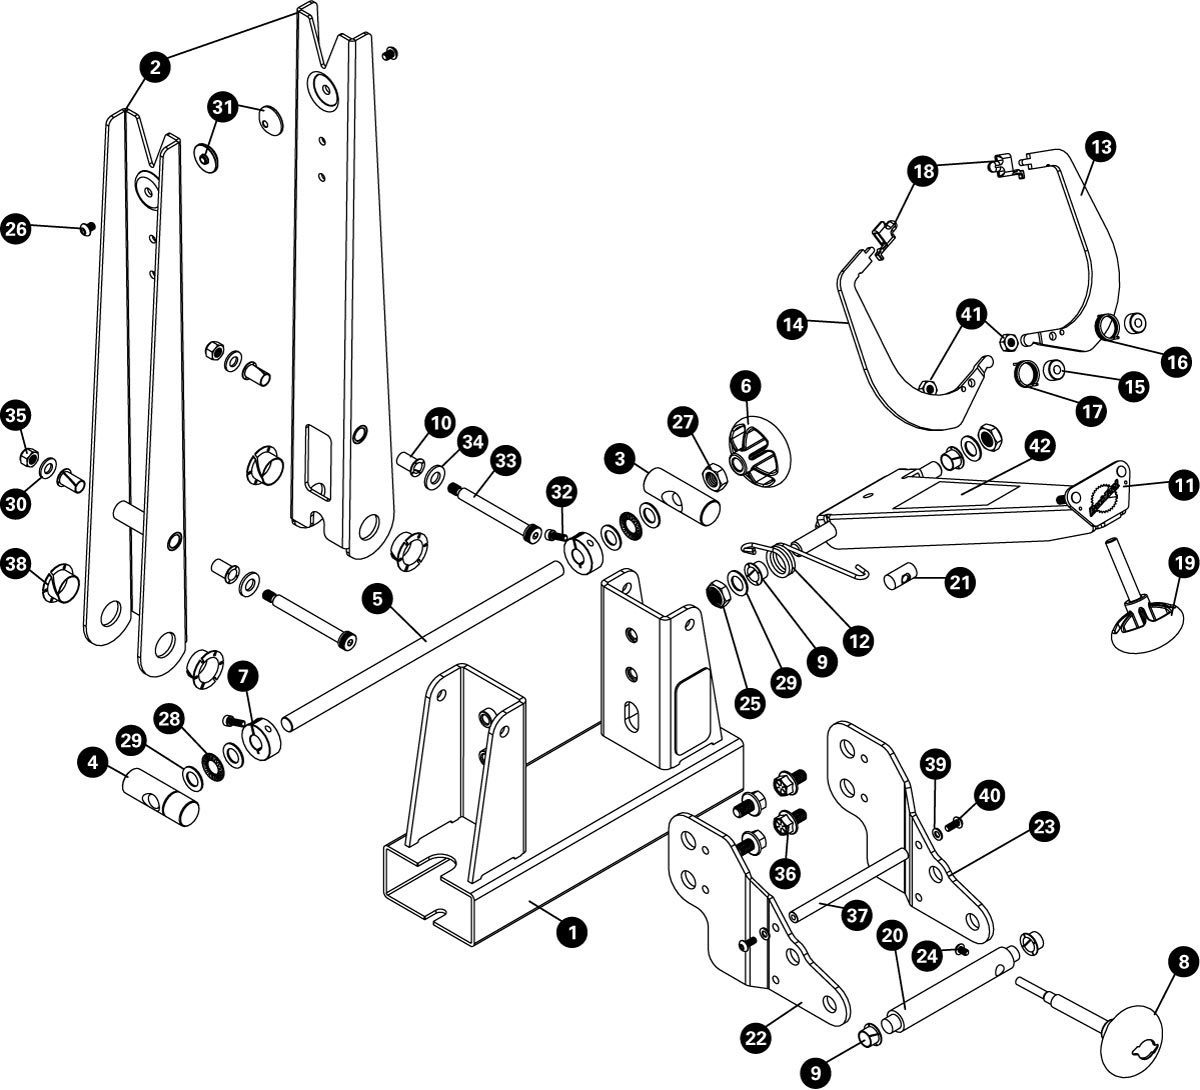 Parts diagram for TS-4 Professional Wheel Truing Stand, click to enlarge